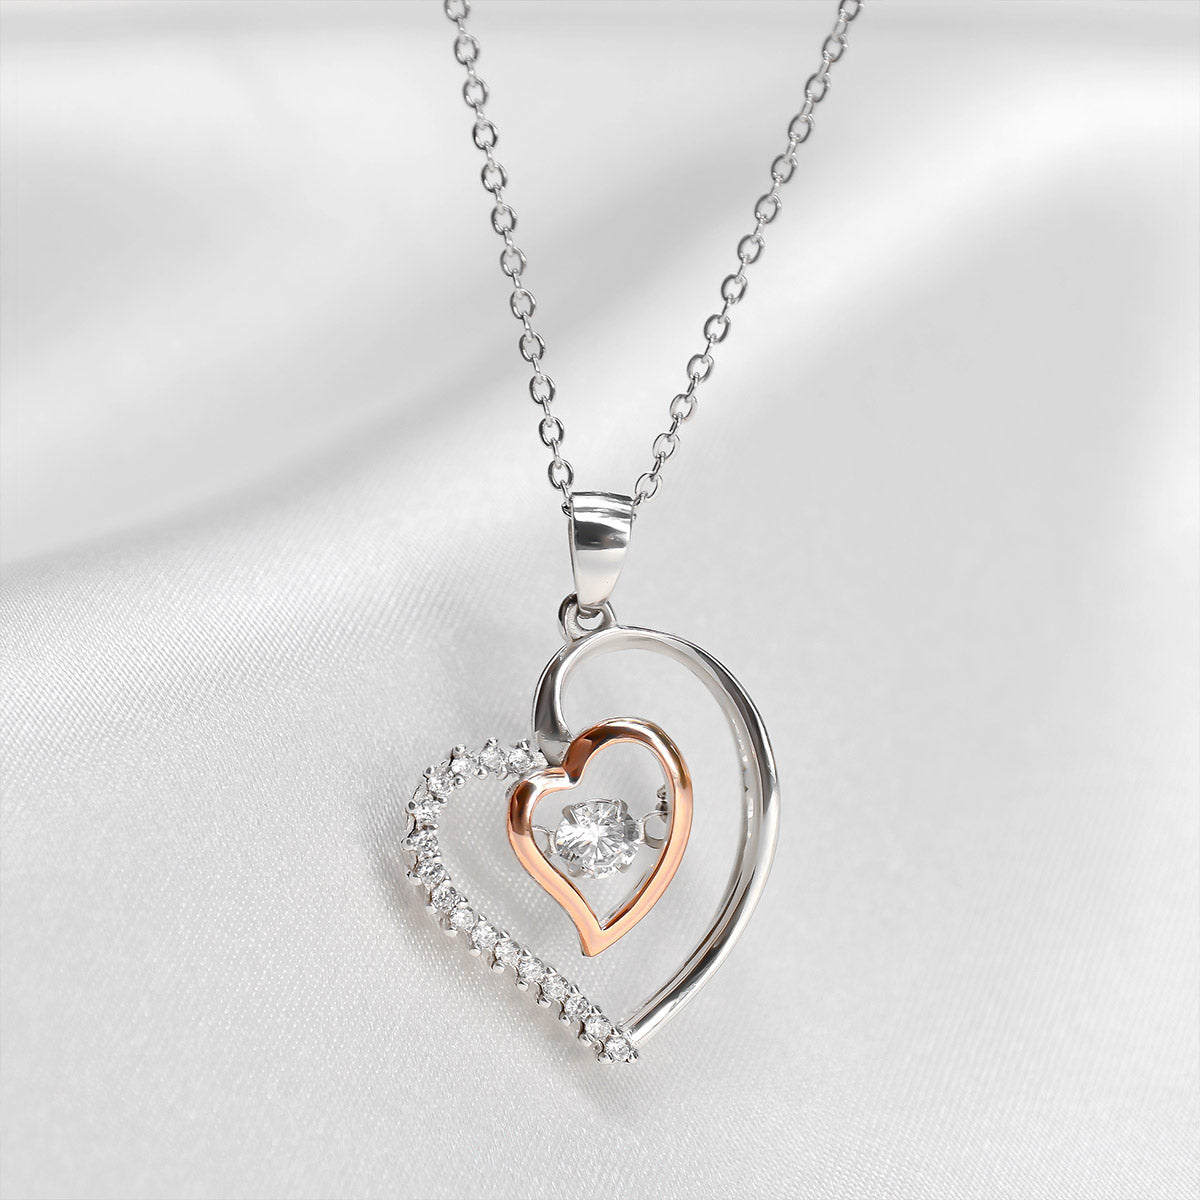 To My Lovely Wife On Her Birthday - Luxe Heart Necklace Gift Set